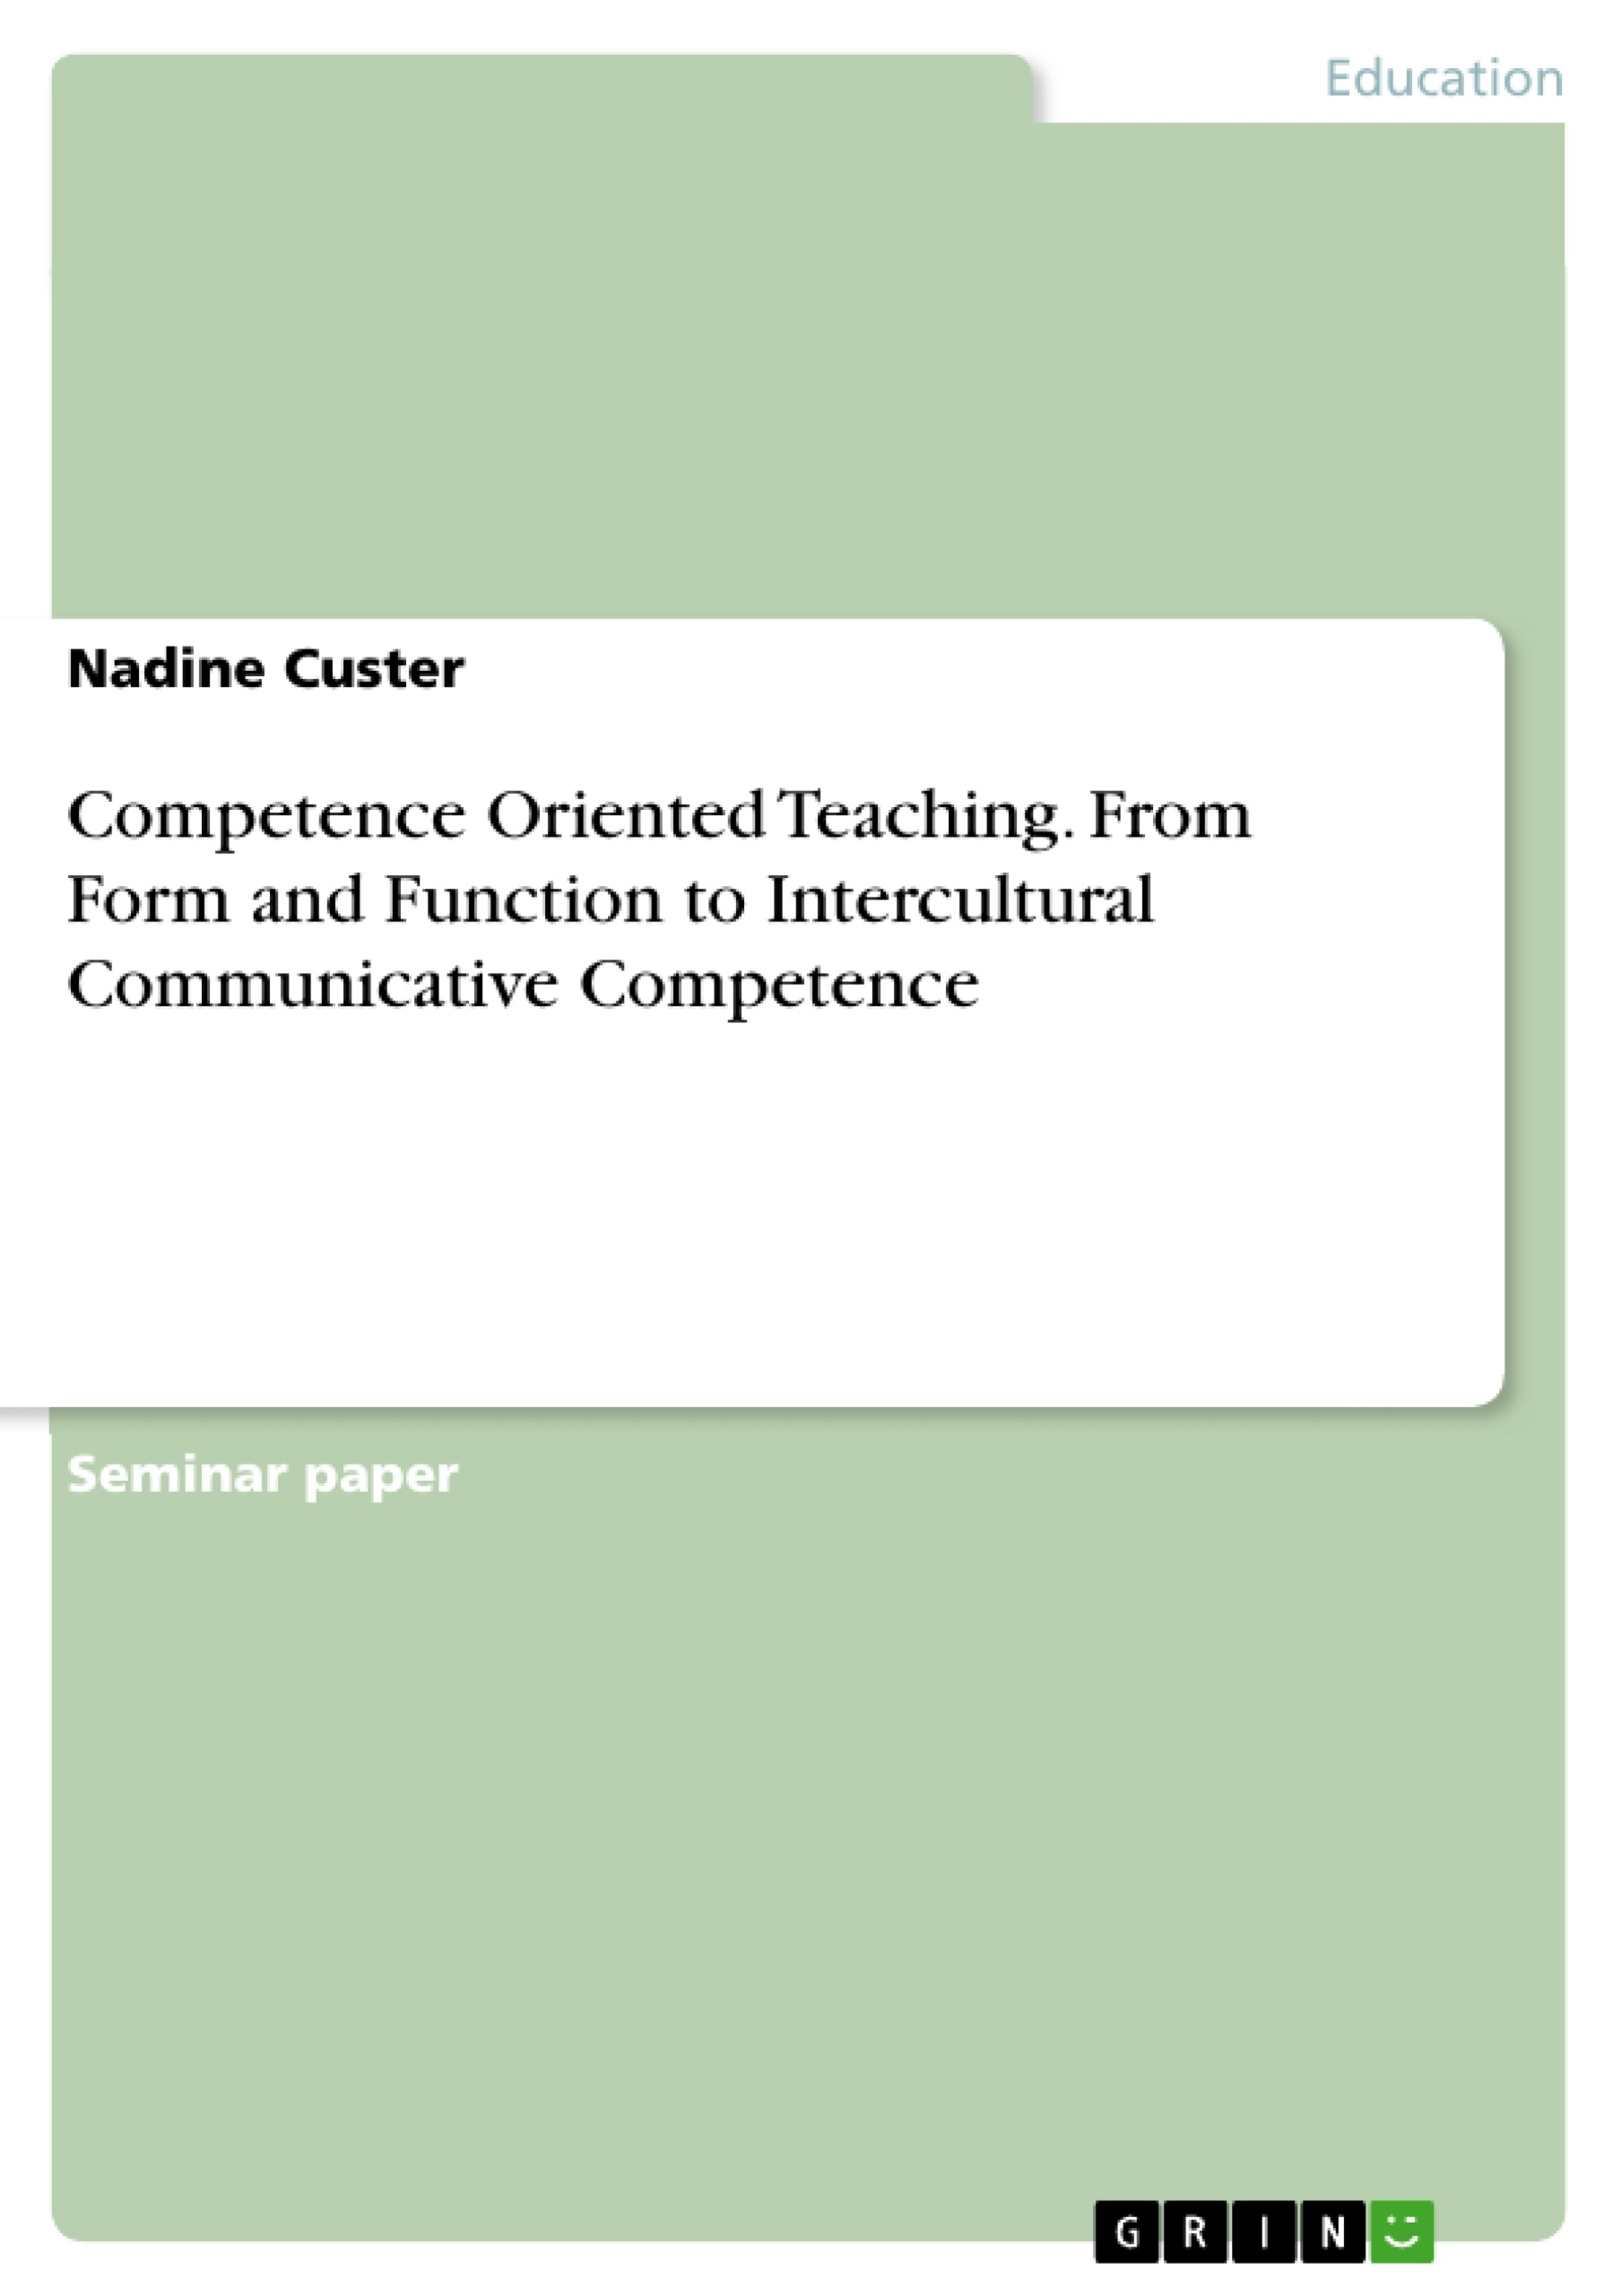 Title: Competence Oriented Teaching. From Form and Function to Intercultural Communicative Competence